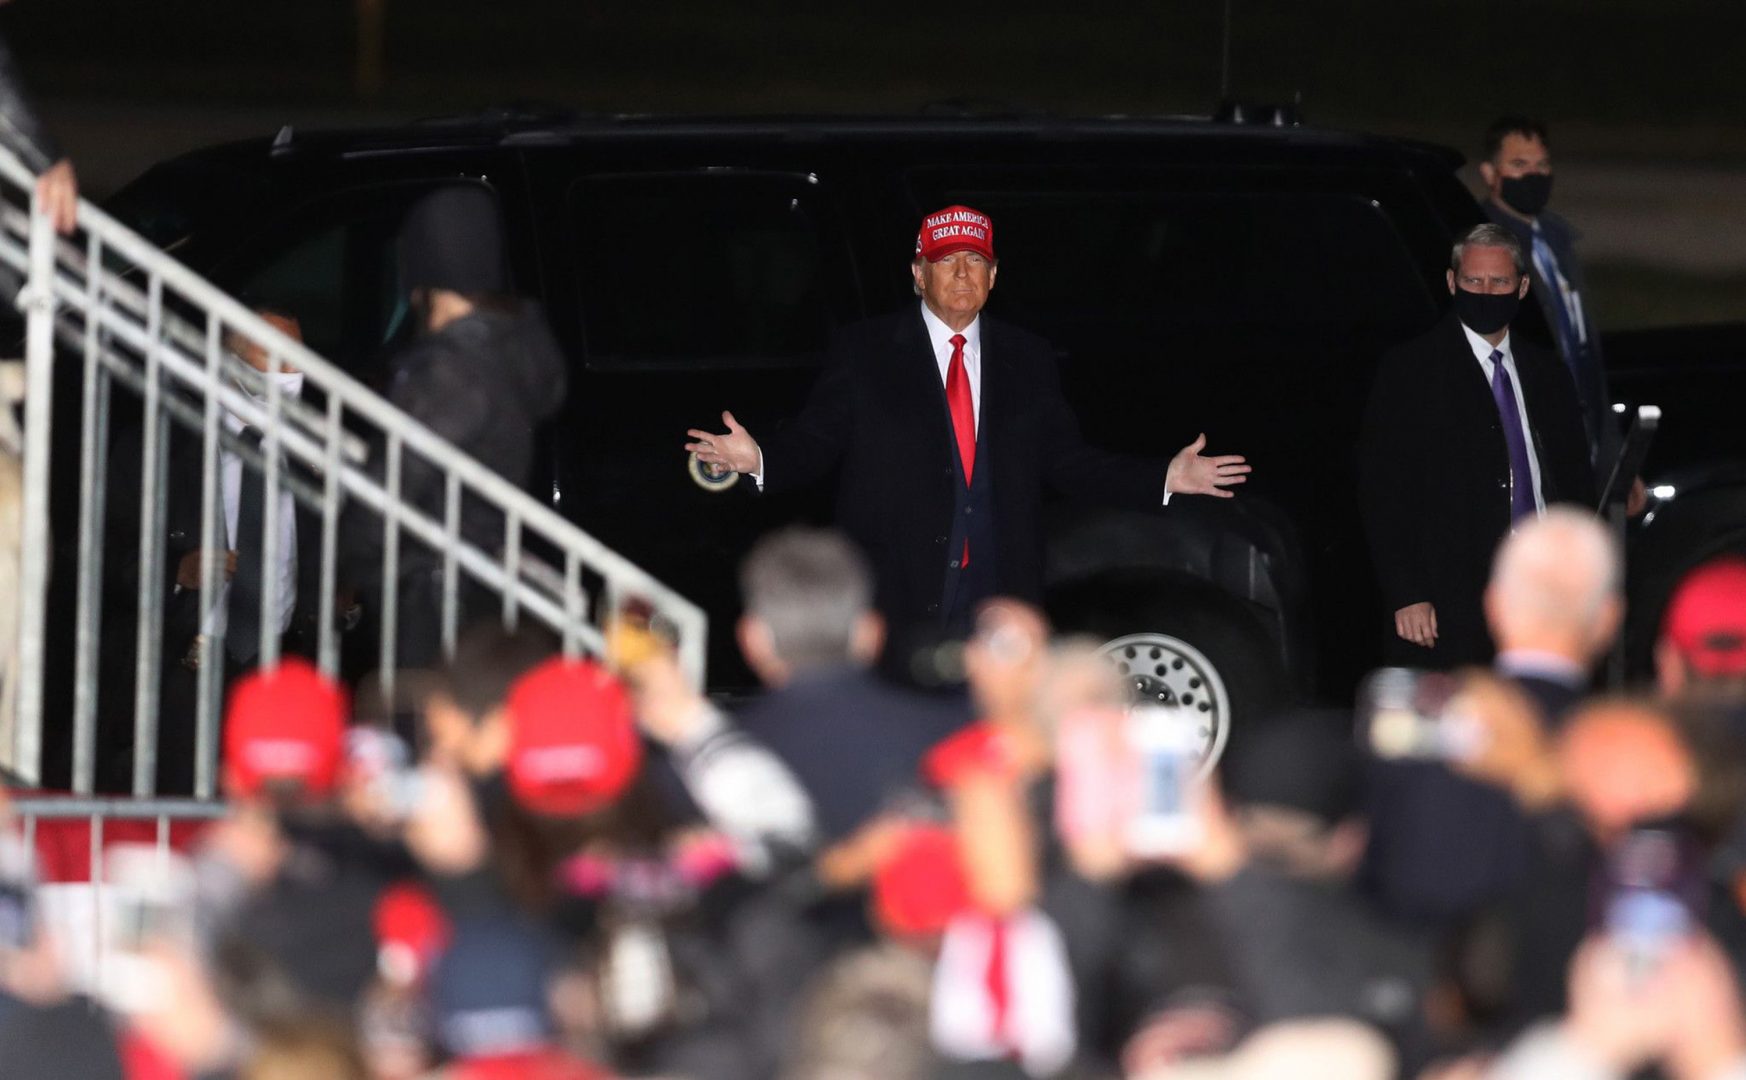 President Donald Trump arrives before speaking at a campaign rally at Southern Wisconsin Regional Airport in Janesville, Wisconsin on Saturday, Oct. 17, 2020.